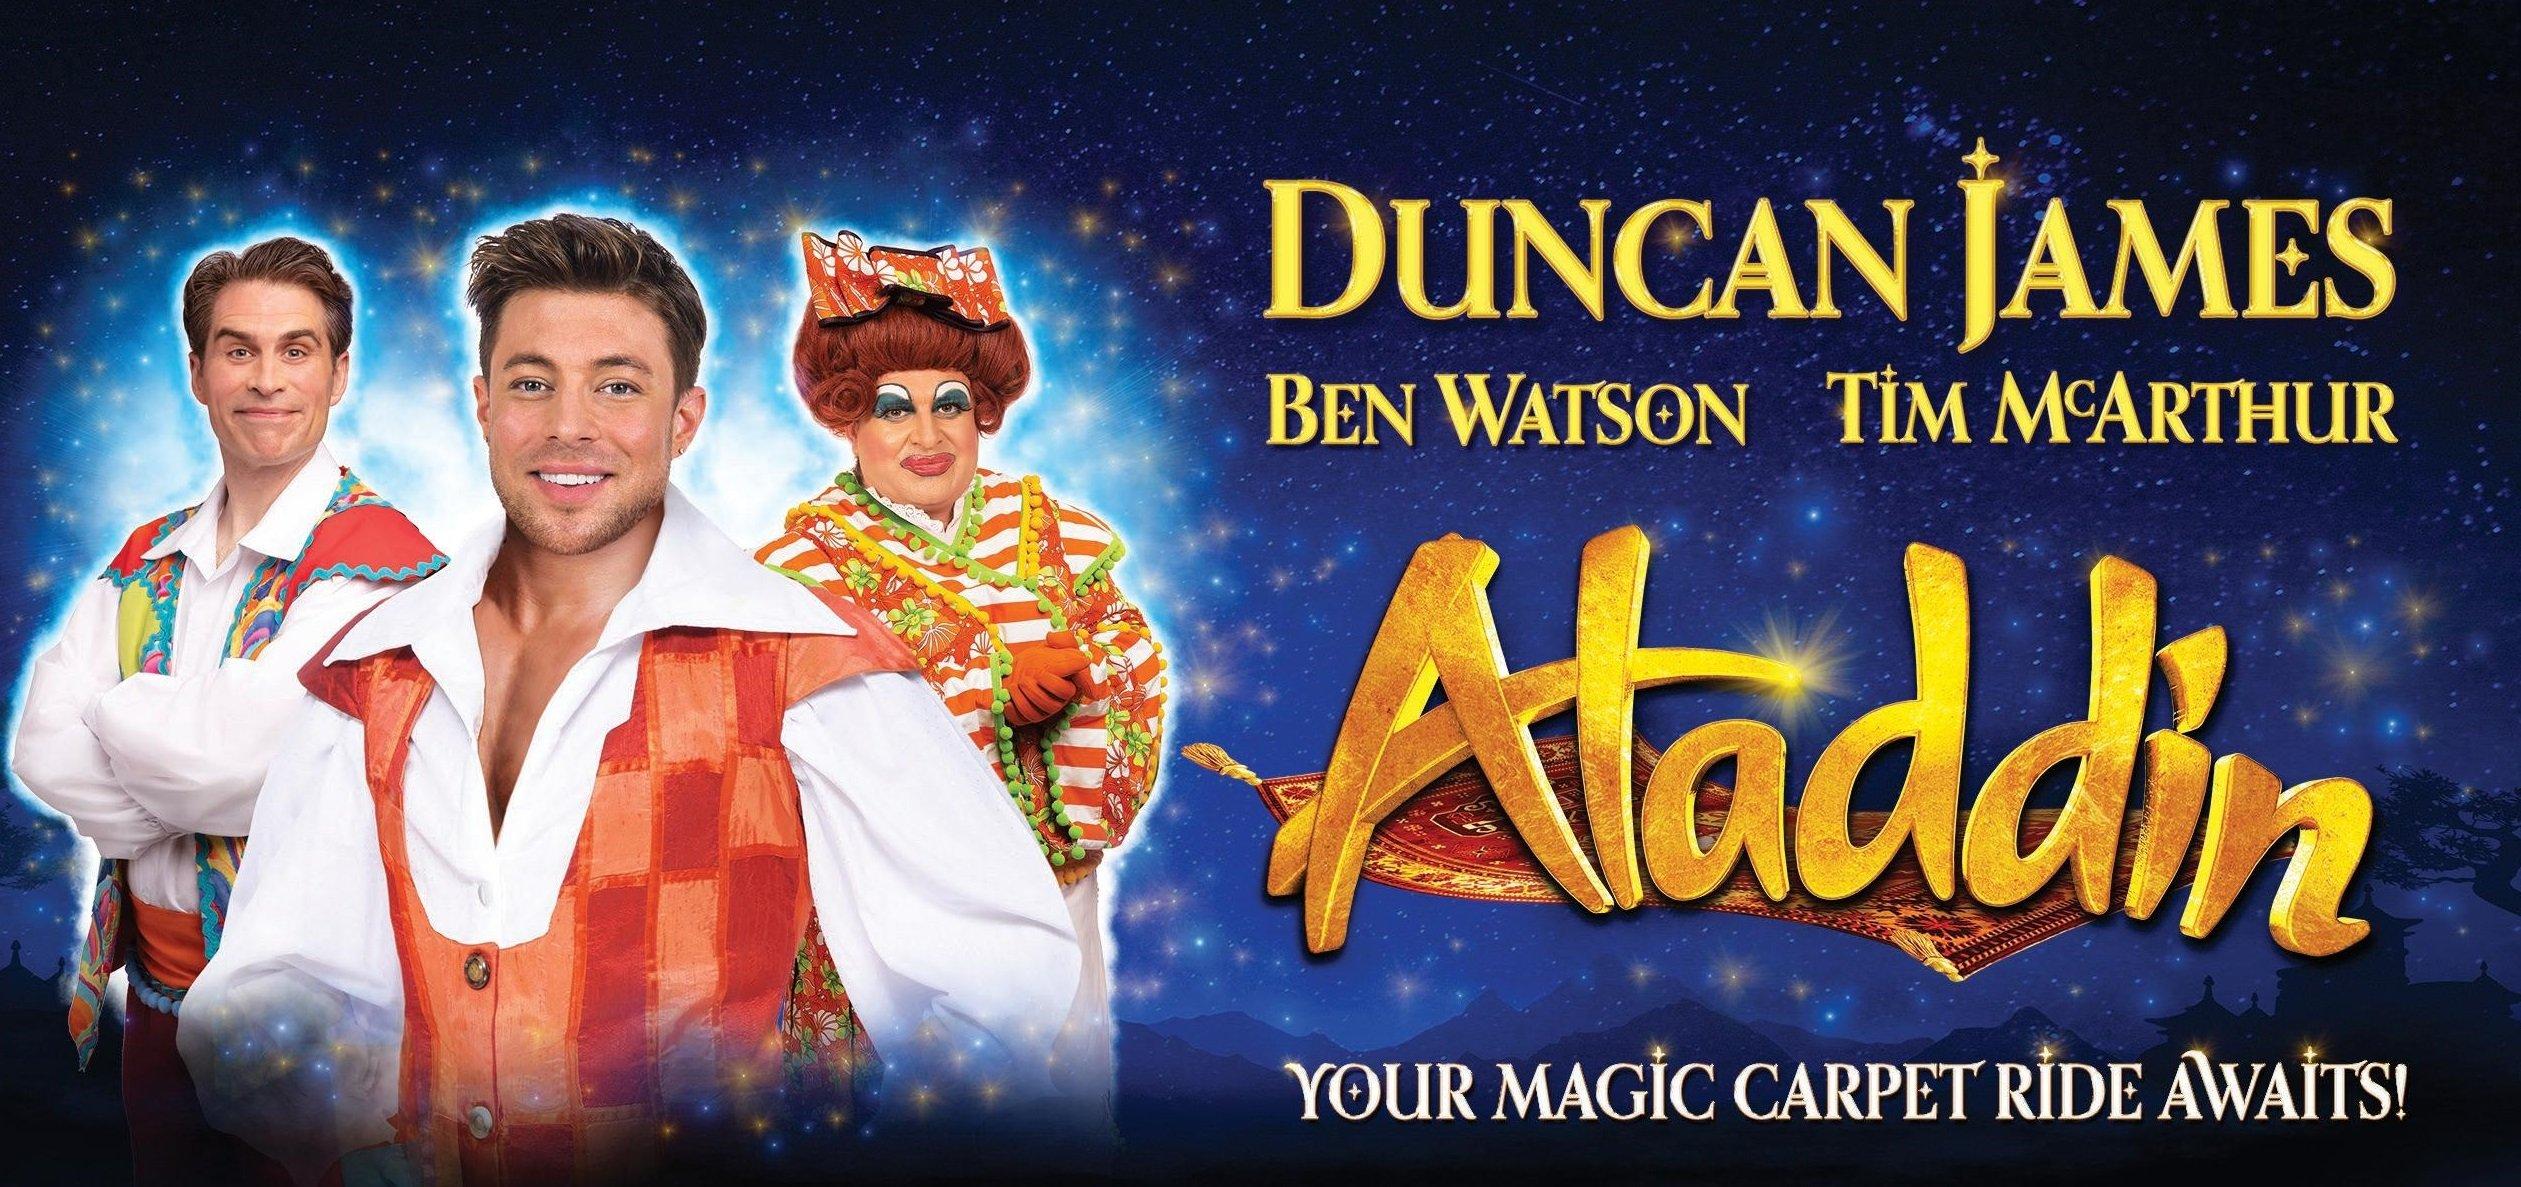 Aladdin will be performed at the White Rock Theatre, White Rock, Hastings from December 13 2019 to December 29 2019.